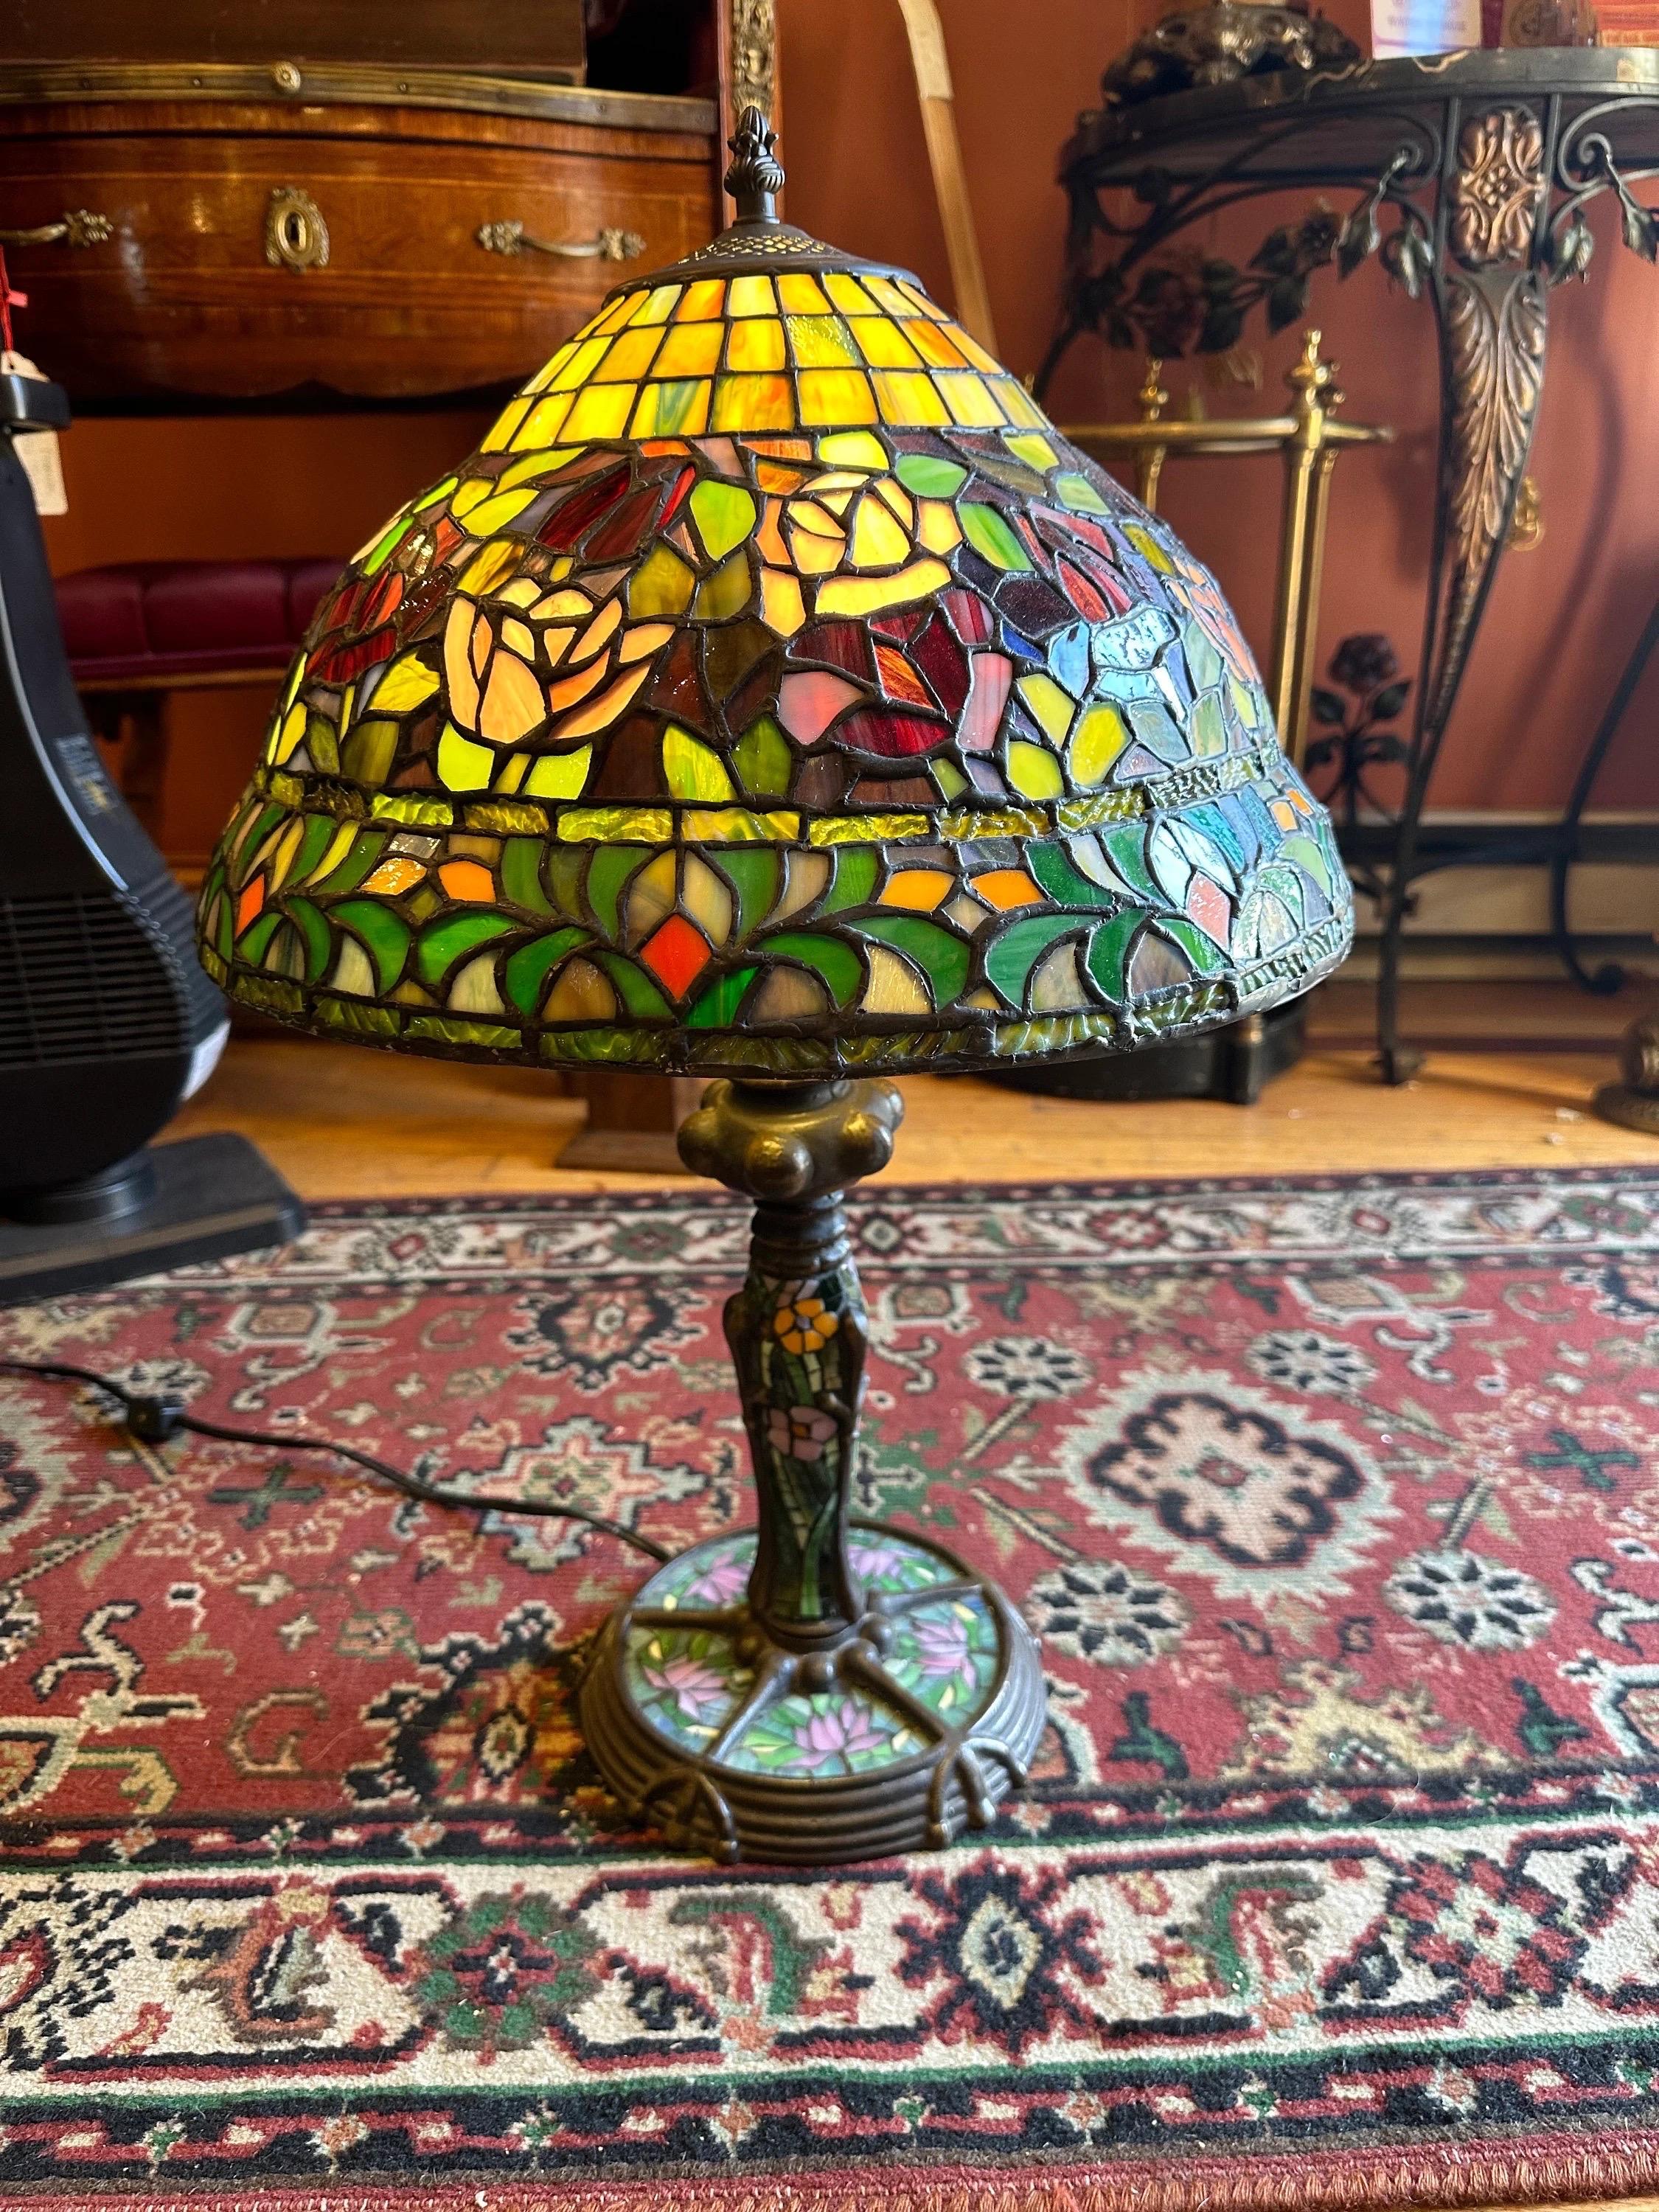 Vintage Art Nouveau Tiffany Style Stained Glass Table Parlor Lamp

Dress up your home with this colorful vintage Art Nouveau Tiffany style stained glass parlor lamp.

Item does not have maker's label.

Circa: 20th Century 

Dimensions:
H: 23”
H: